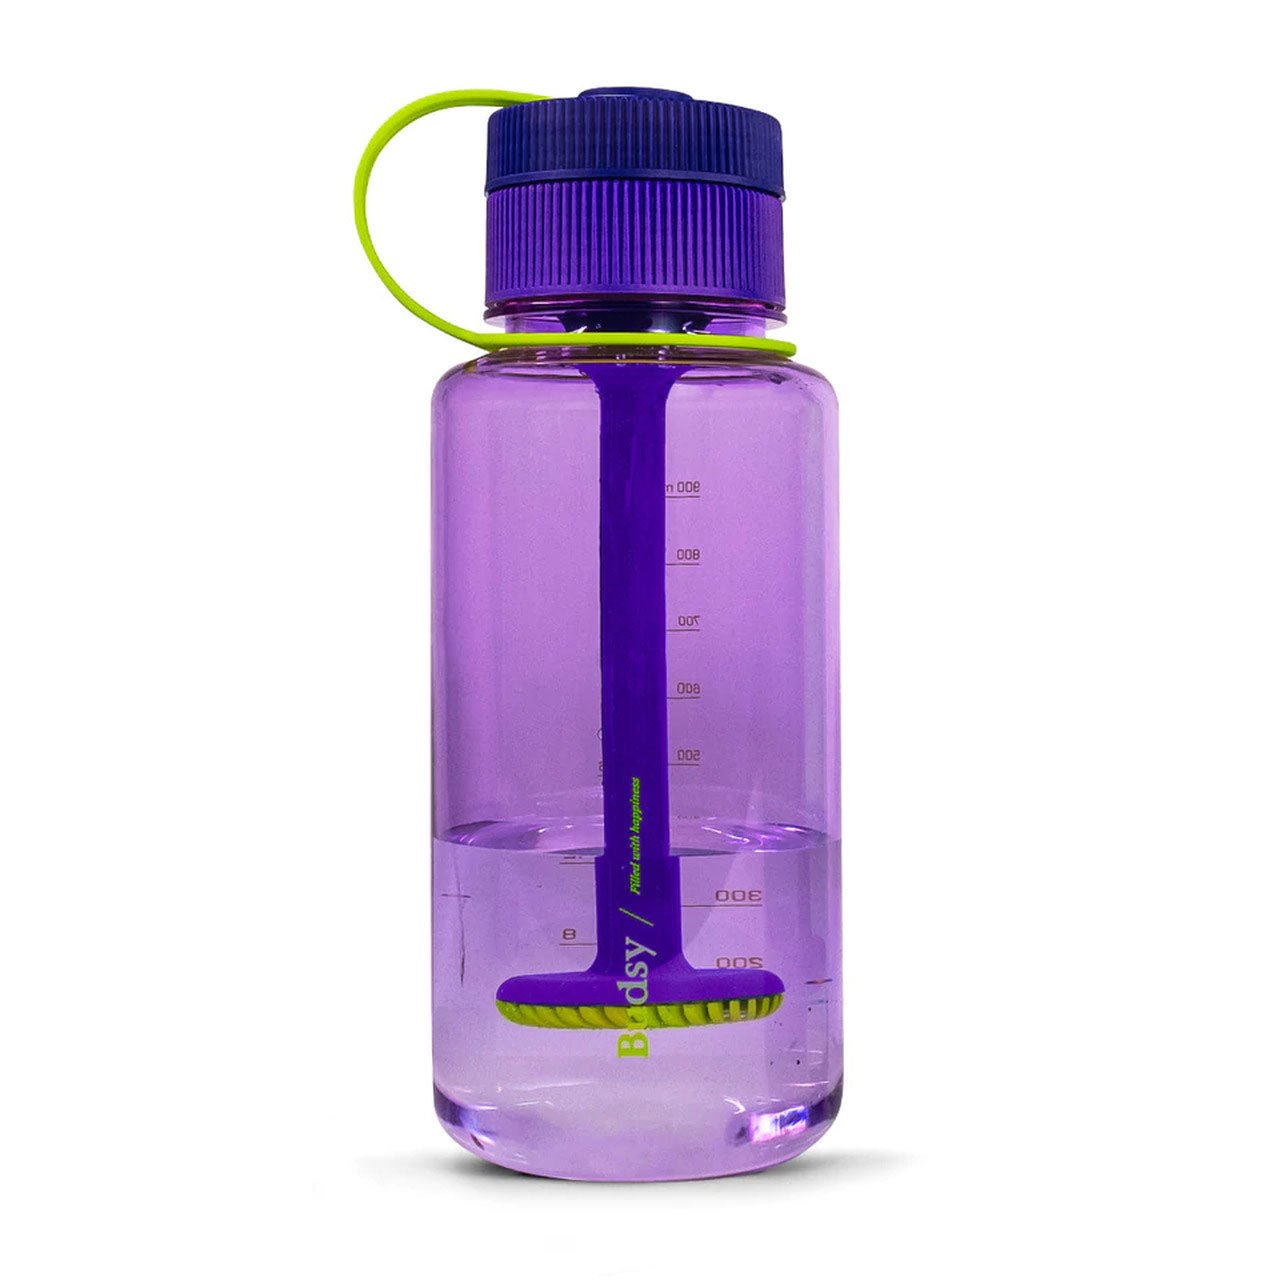 PUFFCO Colored Travel Glass $79.99